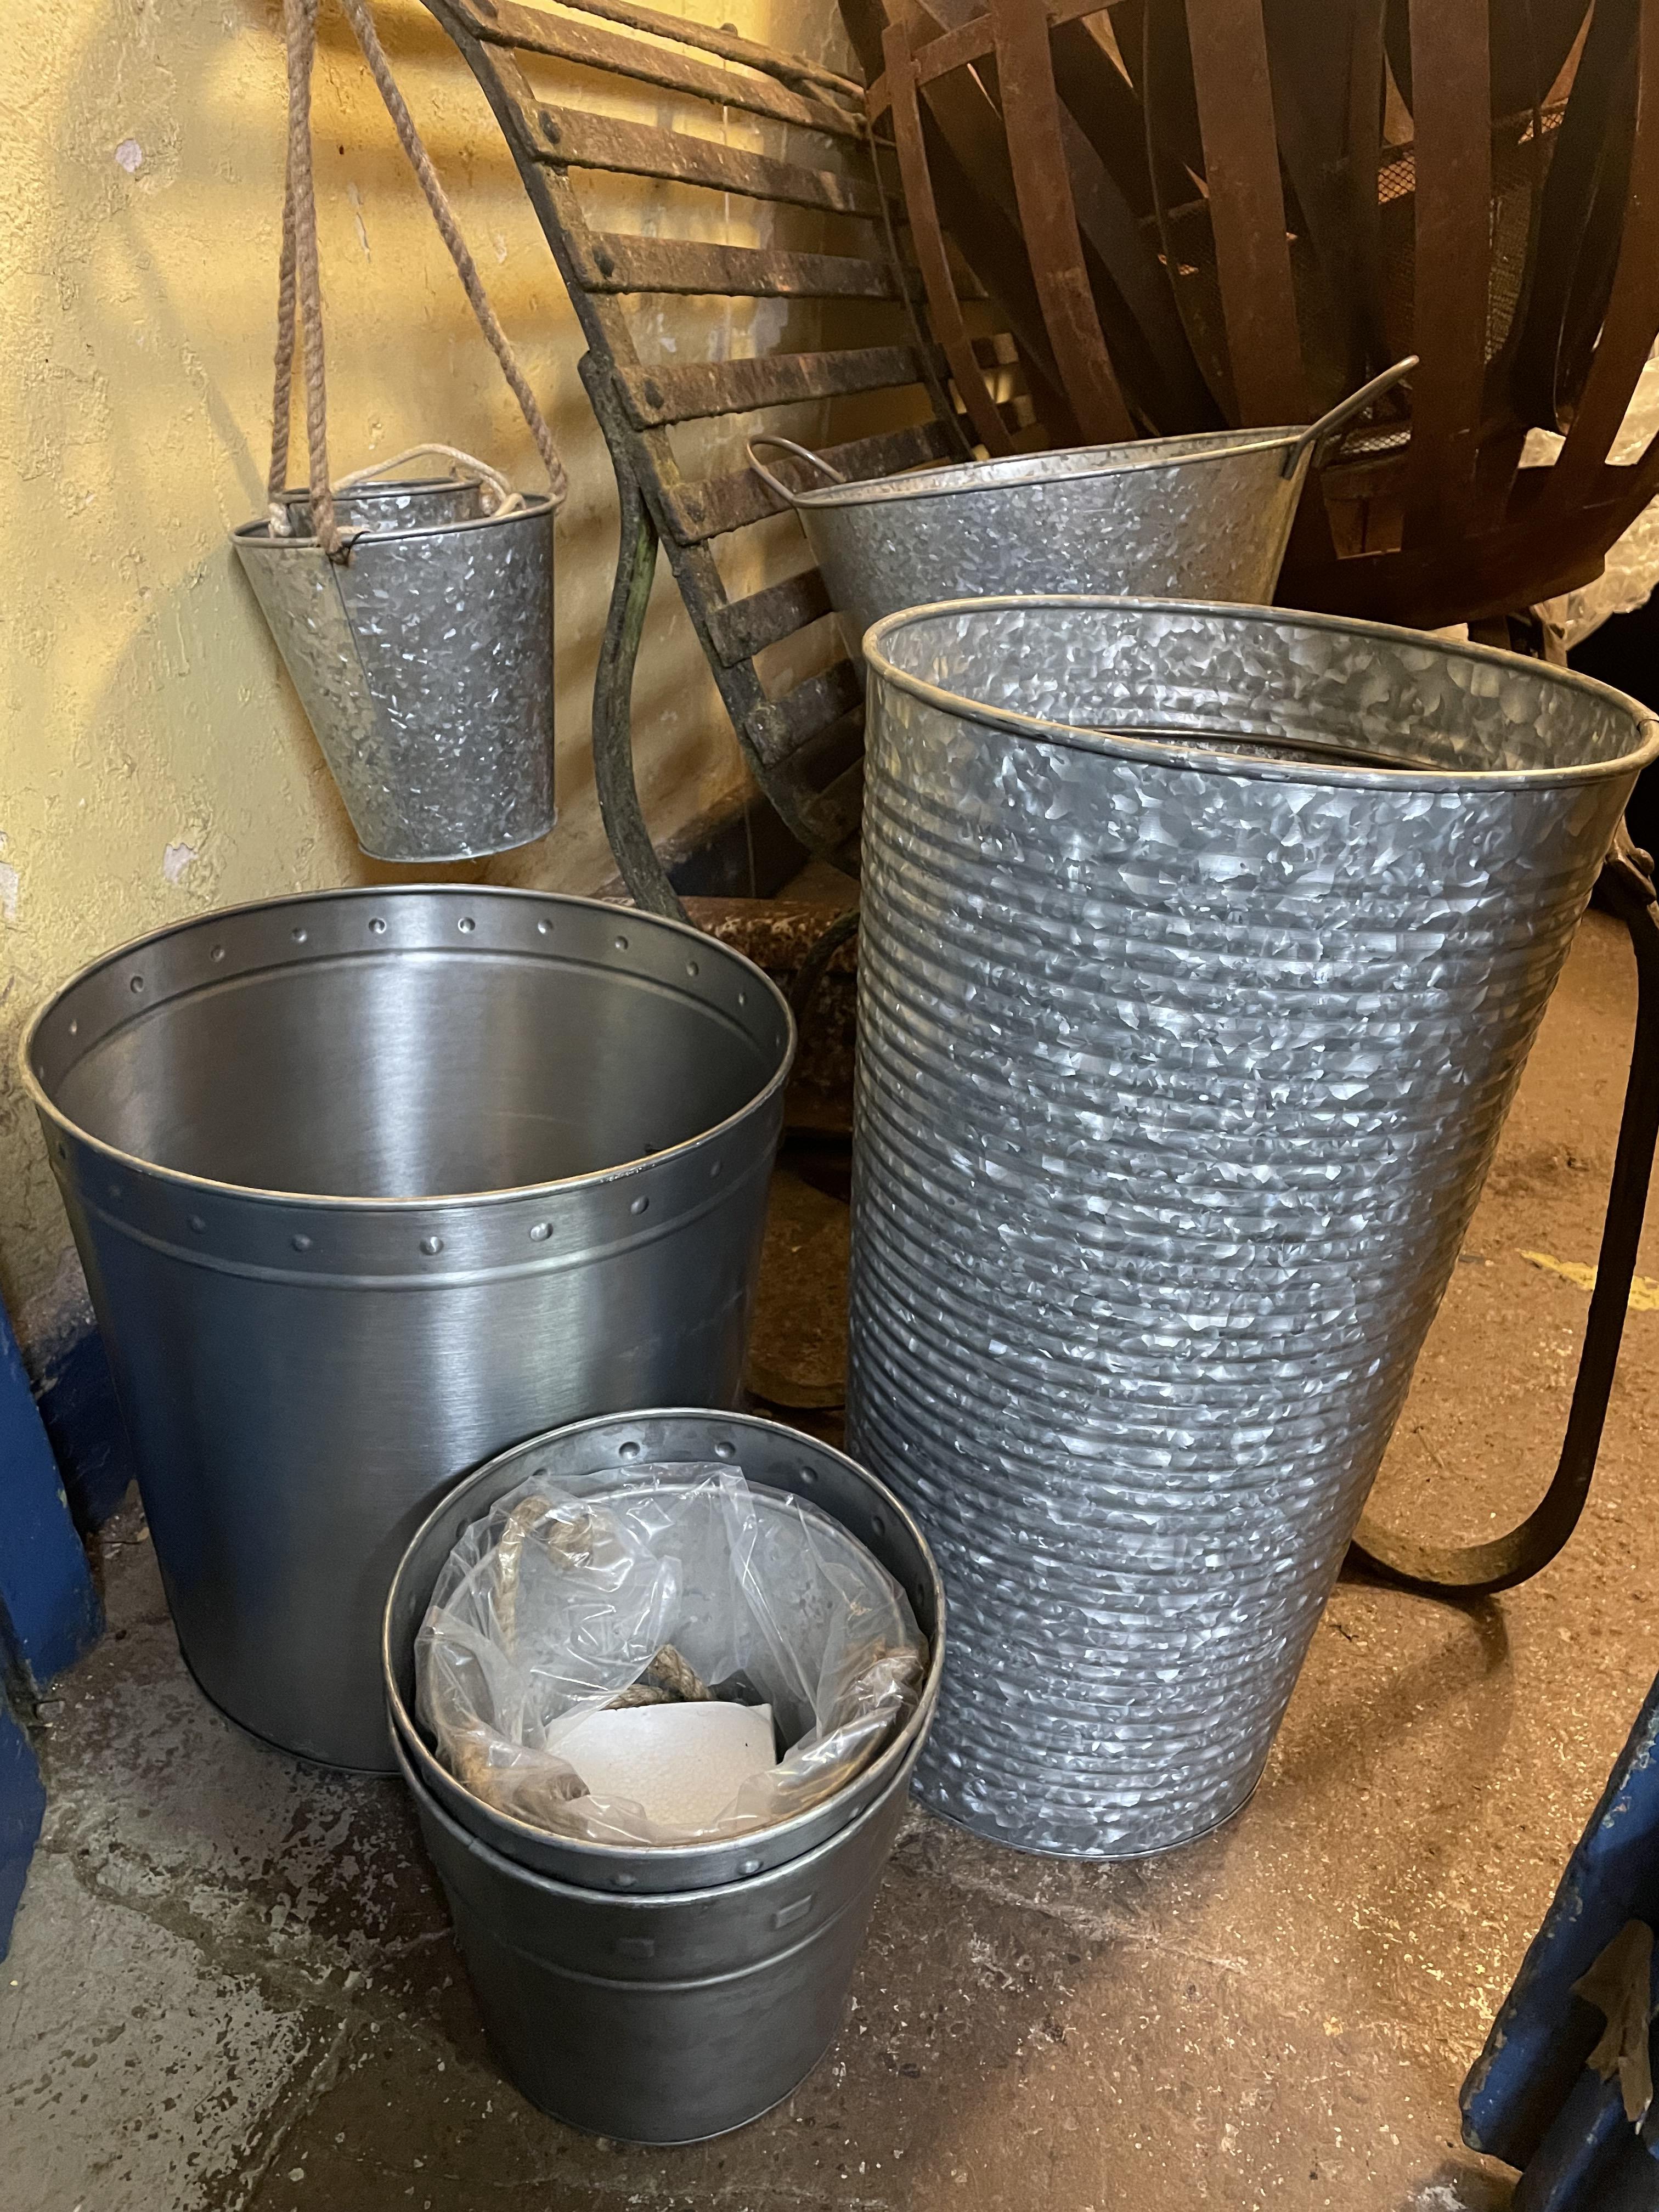 SELECTION OF GALVANIZED SET OF THREE PLANTERS AND A GALVANIZED MILK CHURN PLANTER - Image 4 of 4